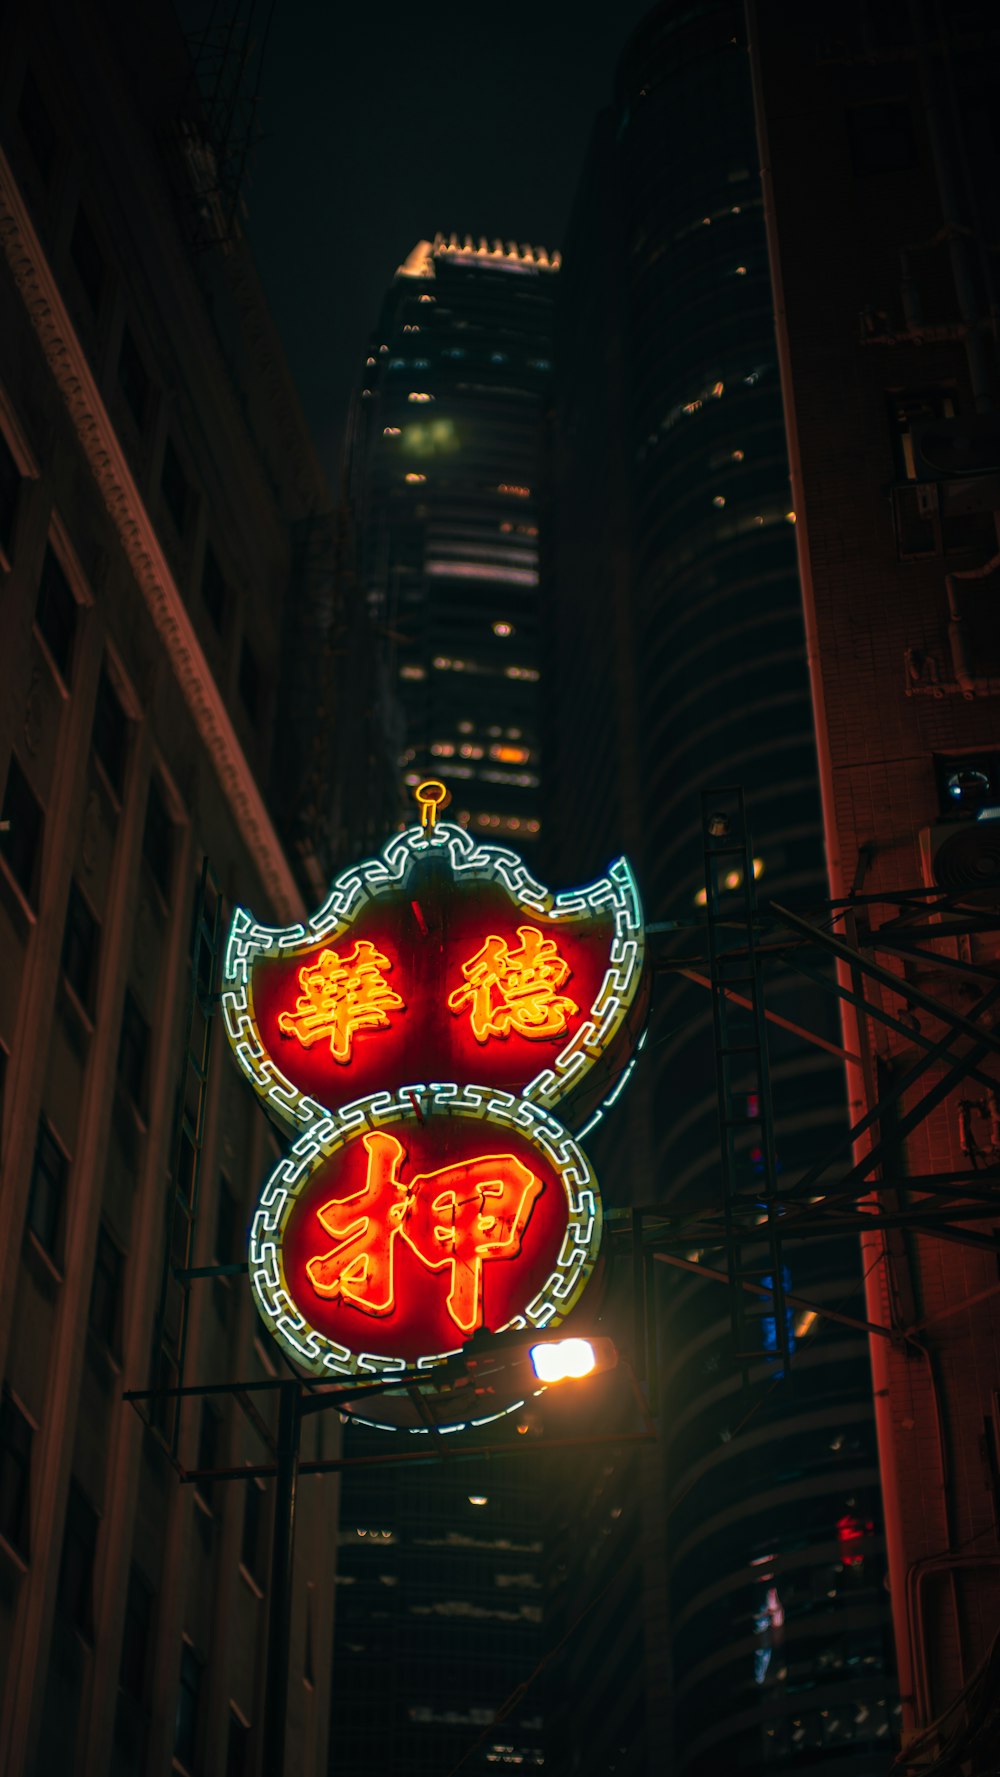 a lighted sign in a city